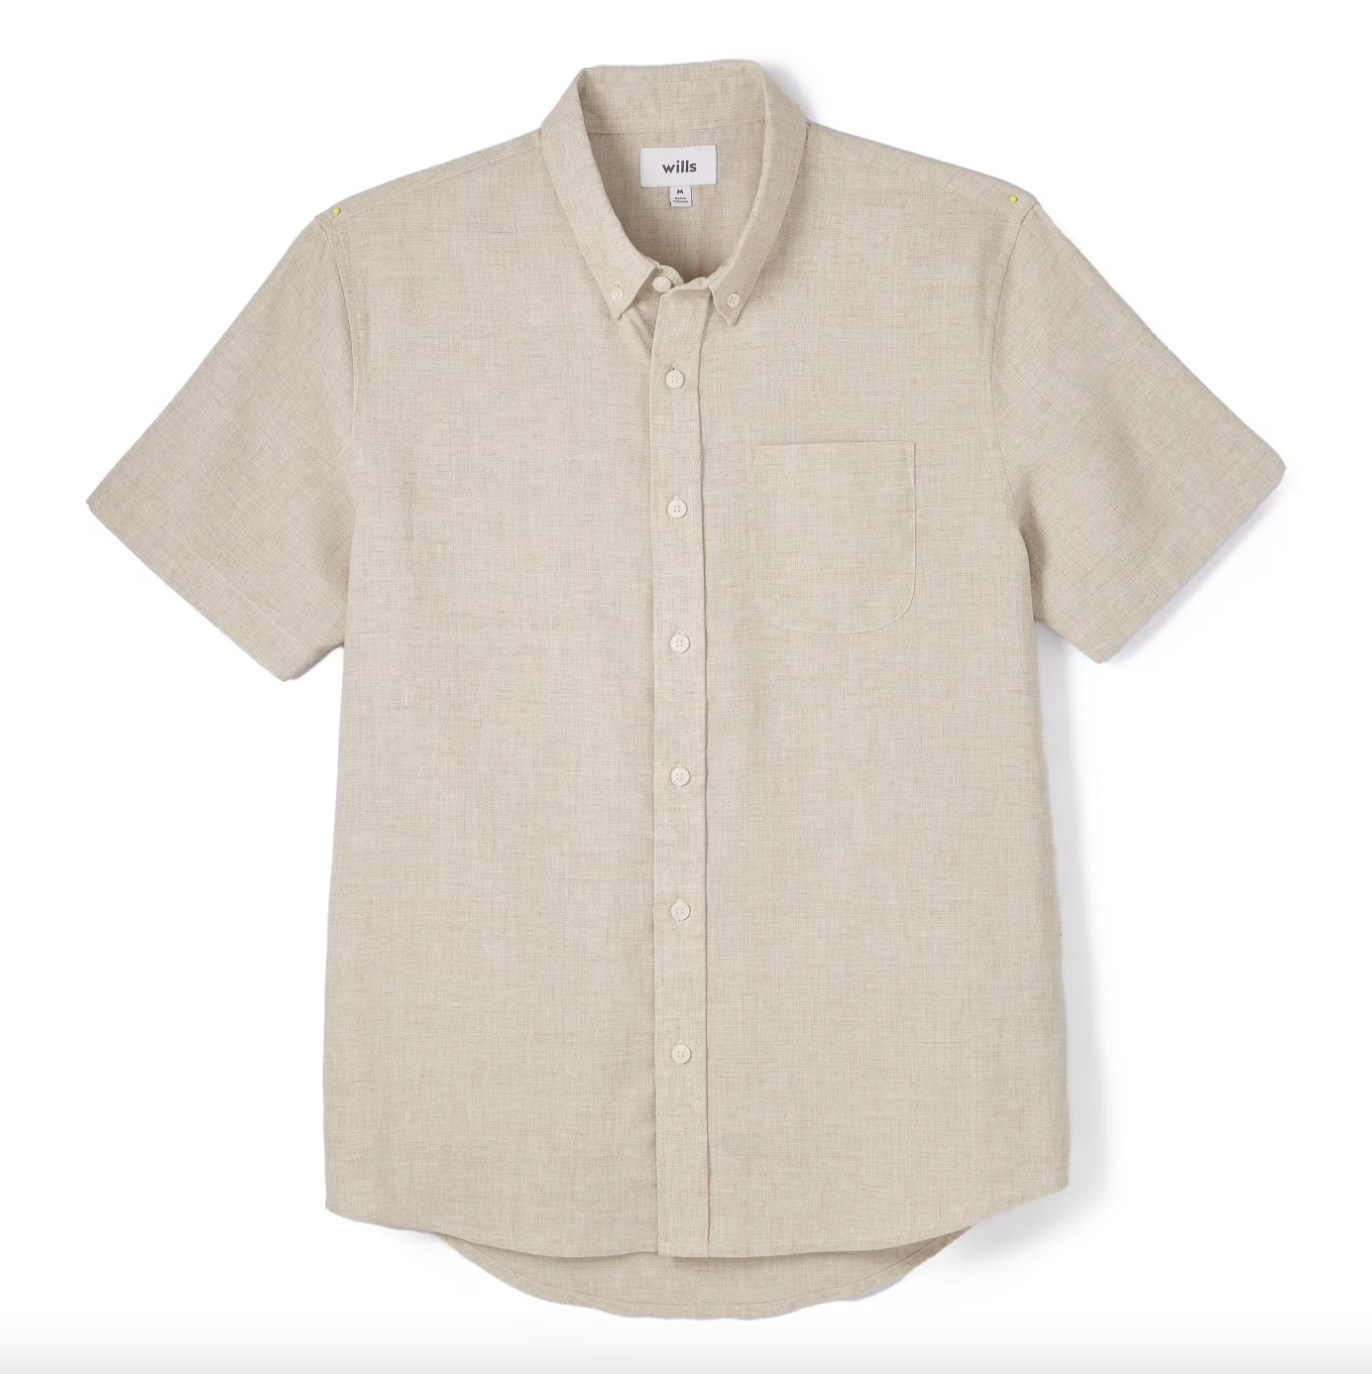 Say Goodbye To Ironing With Wills Wrinkle Free Linen Shirts - BroBible